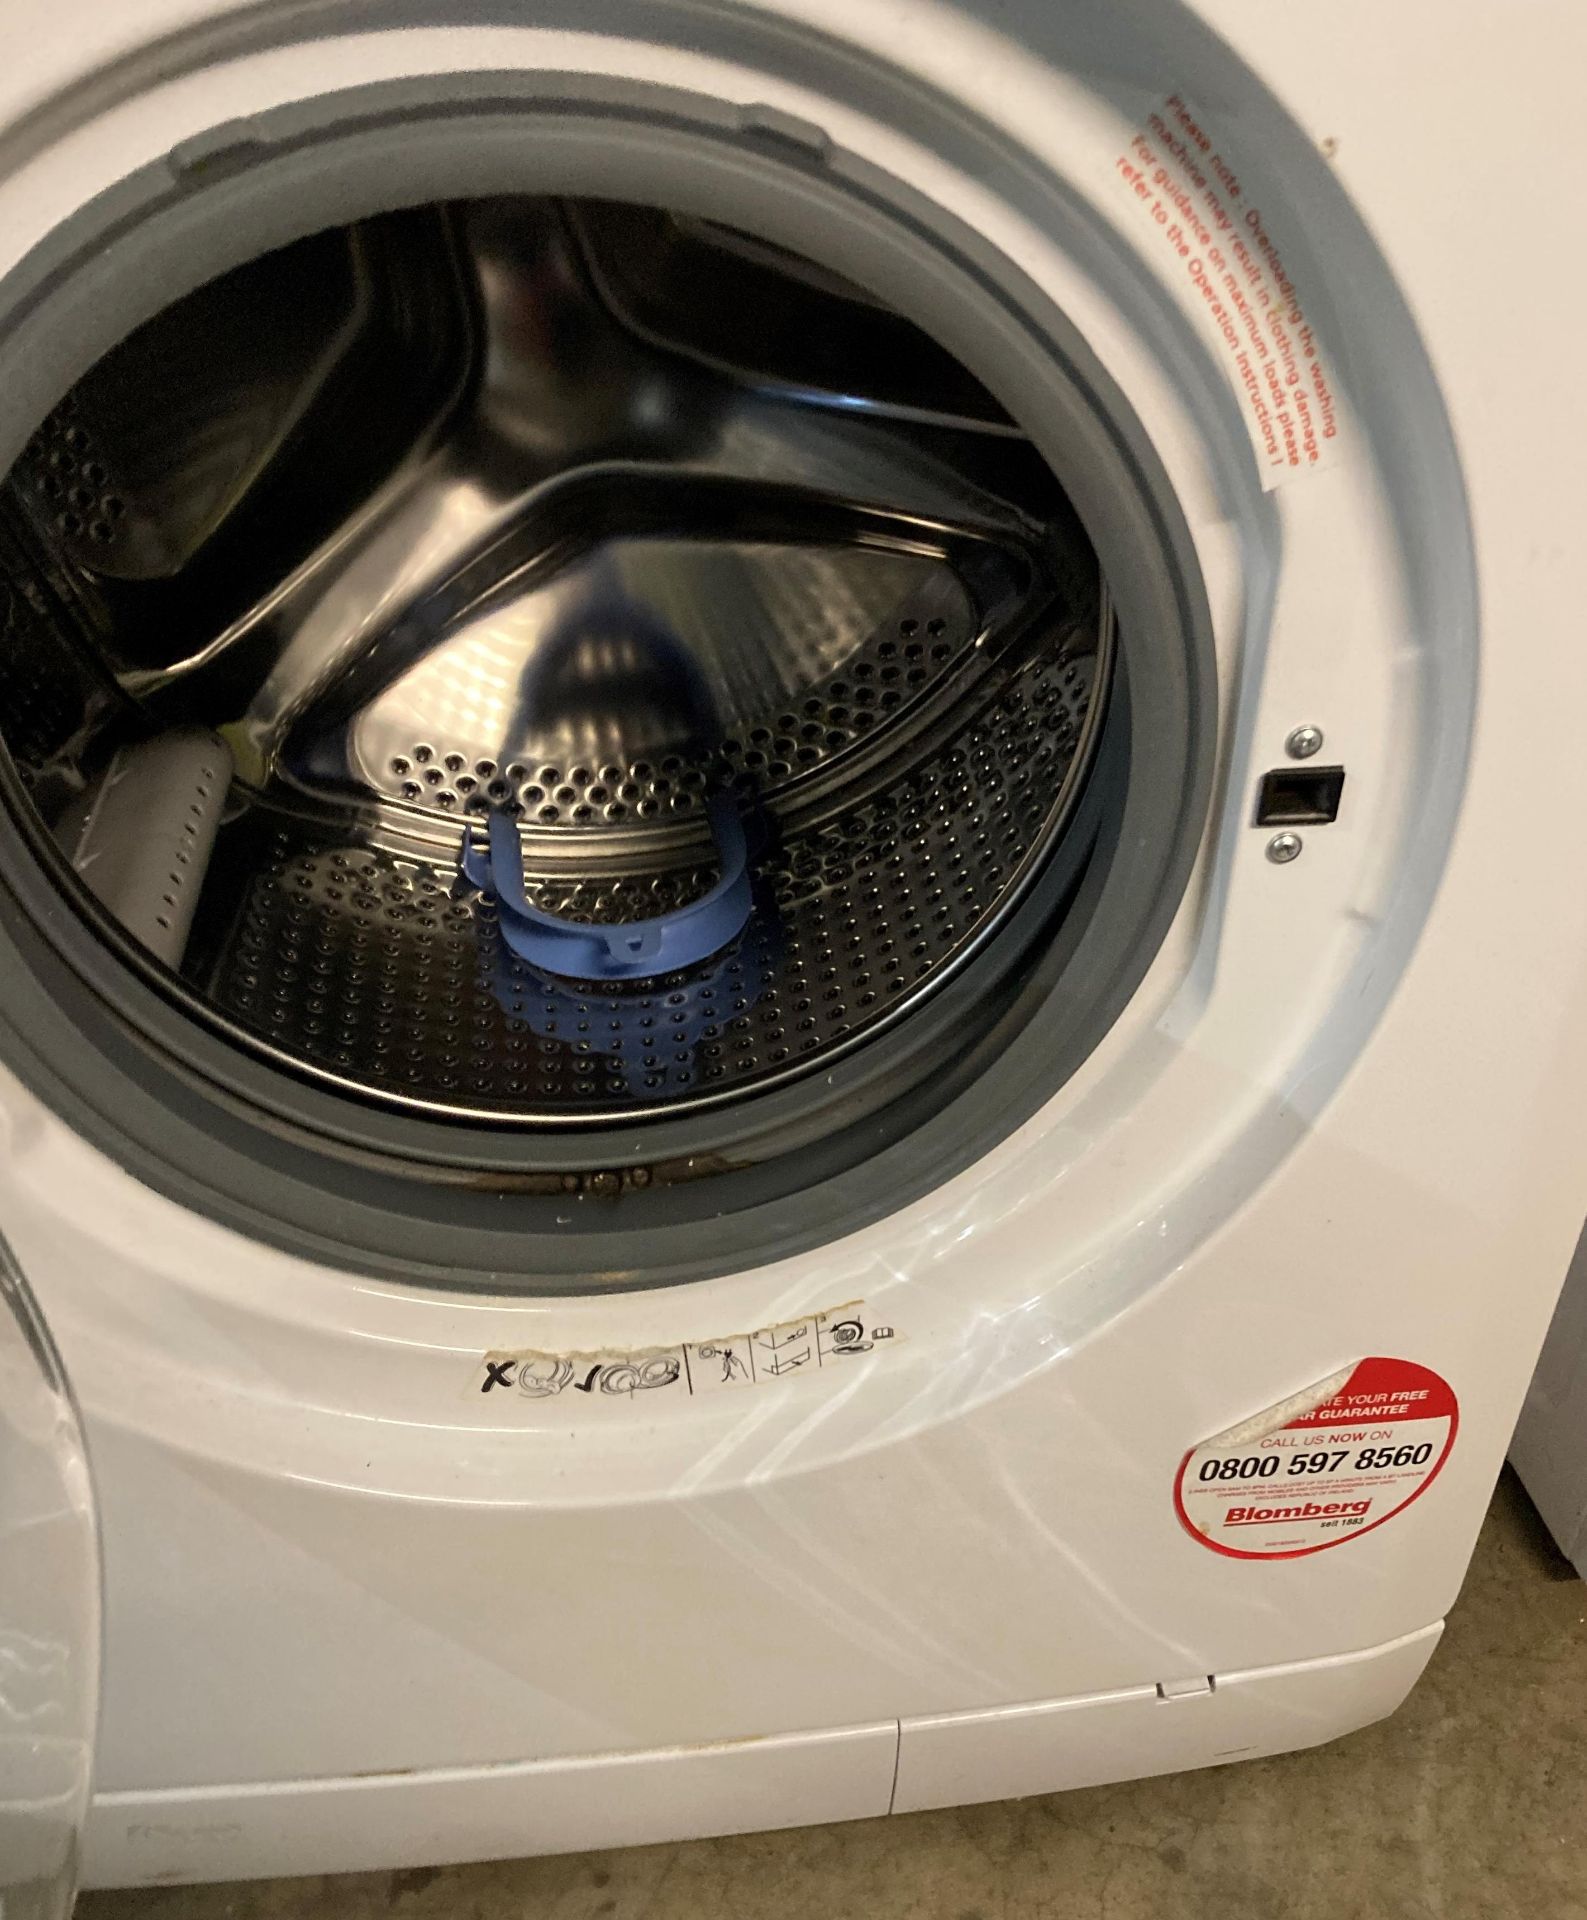 Blomberg 6kg 1200rpm A+ class automatic washing machine model WNF6222(saleroom location PO) - Image 2 of 2